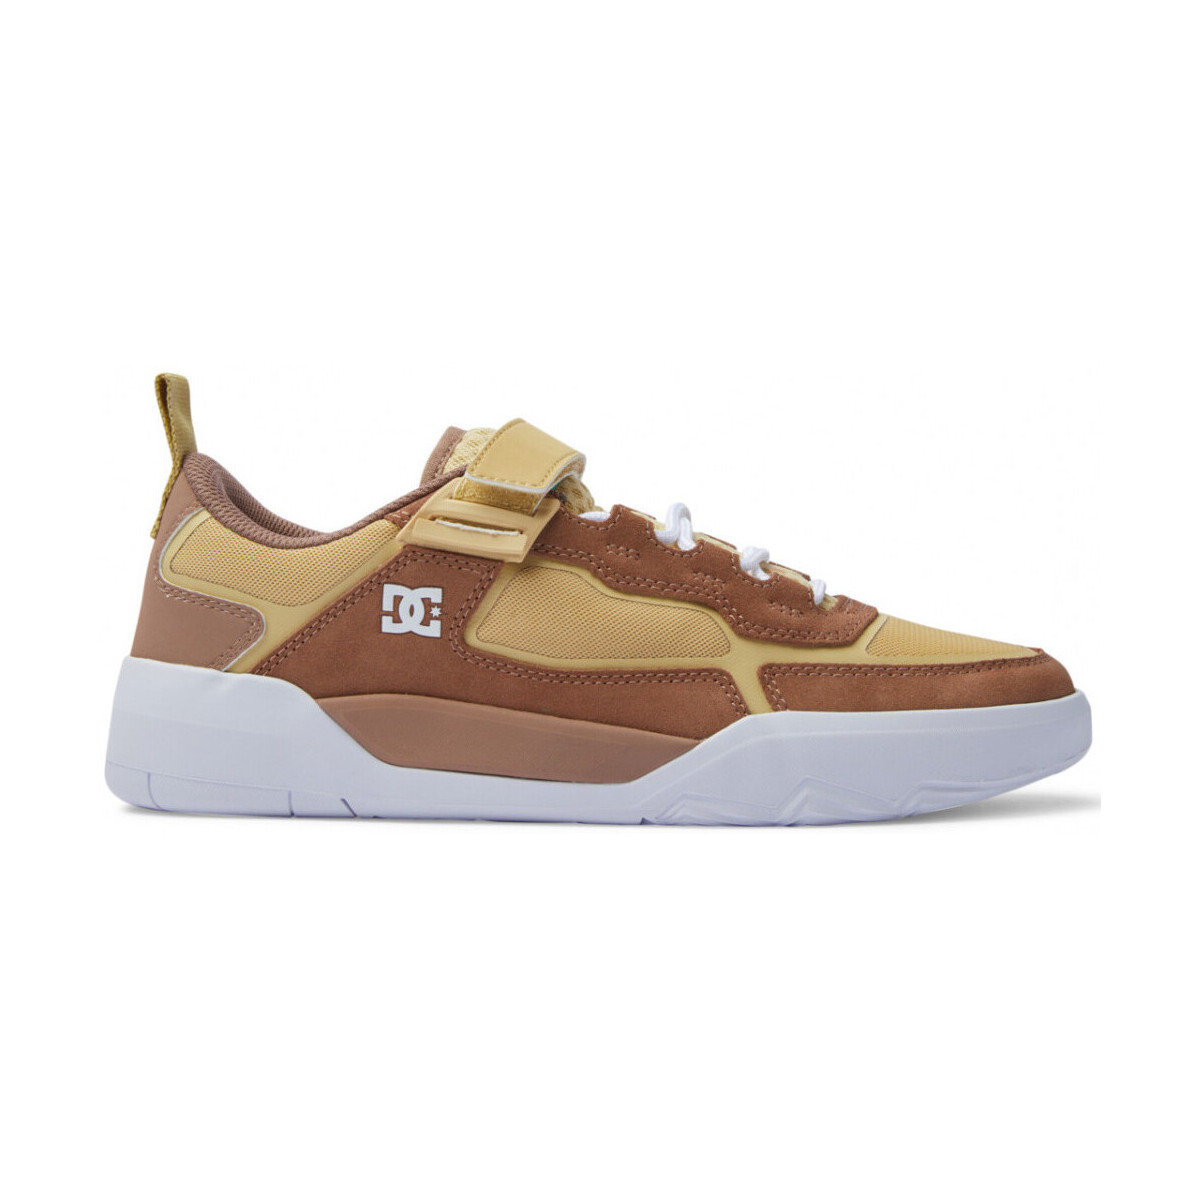 Chaussures Chaussures de Skate DC Shoes METRIC X WILL brown tan Marron